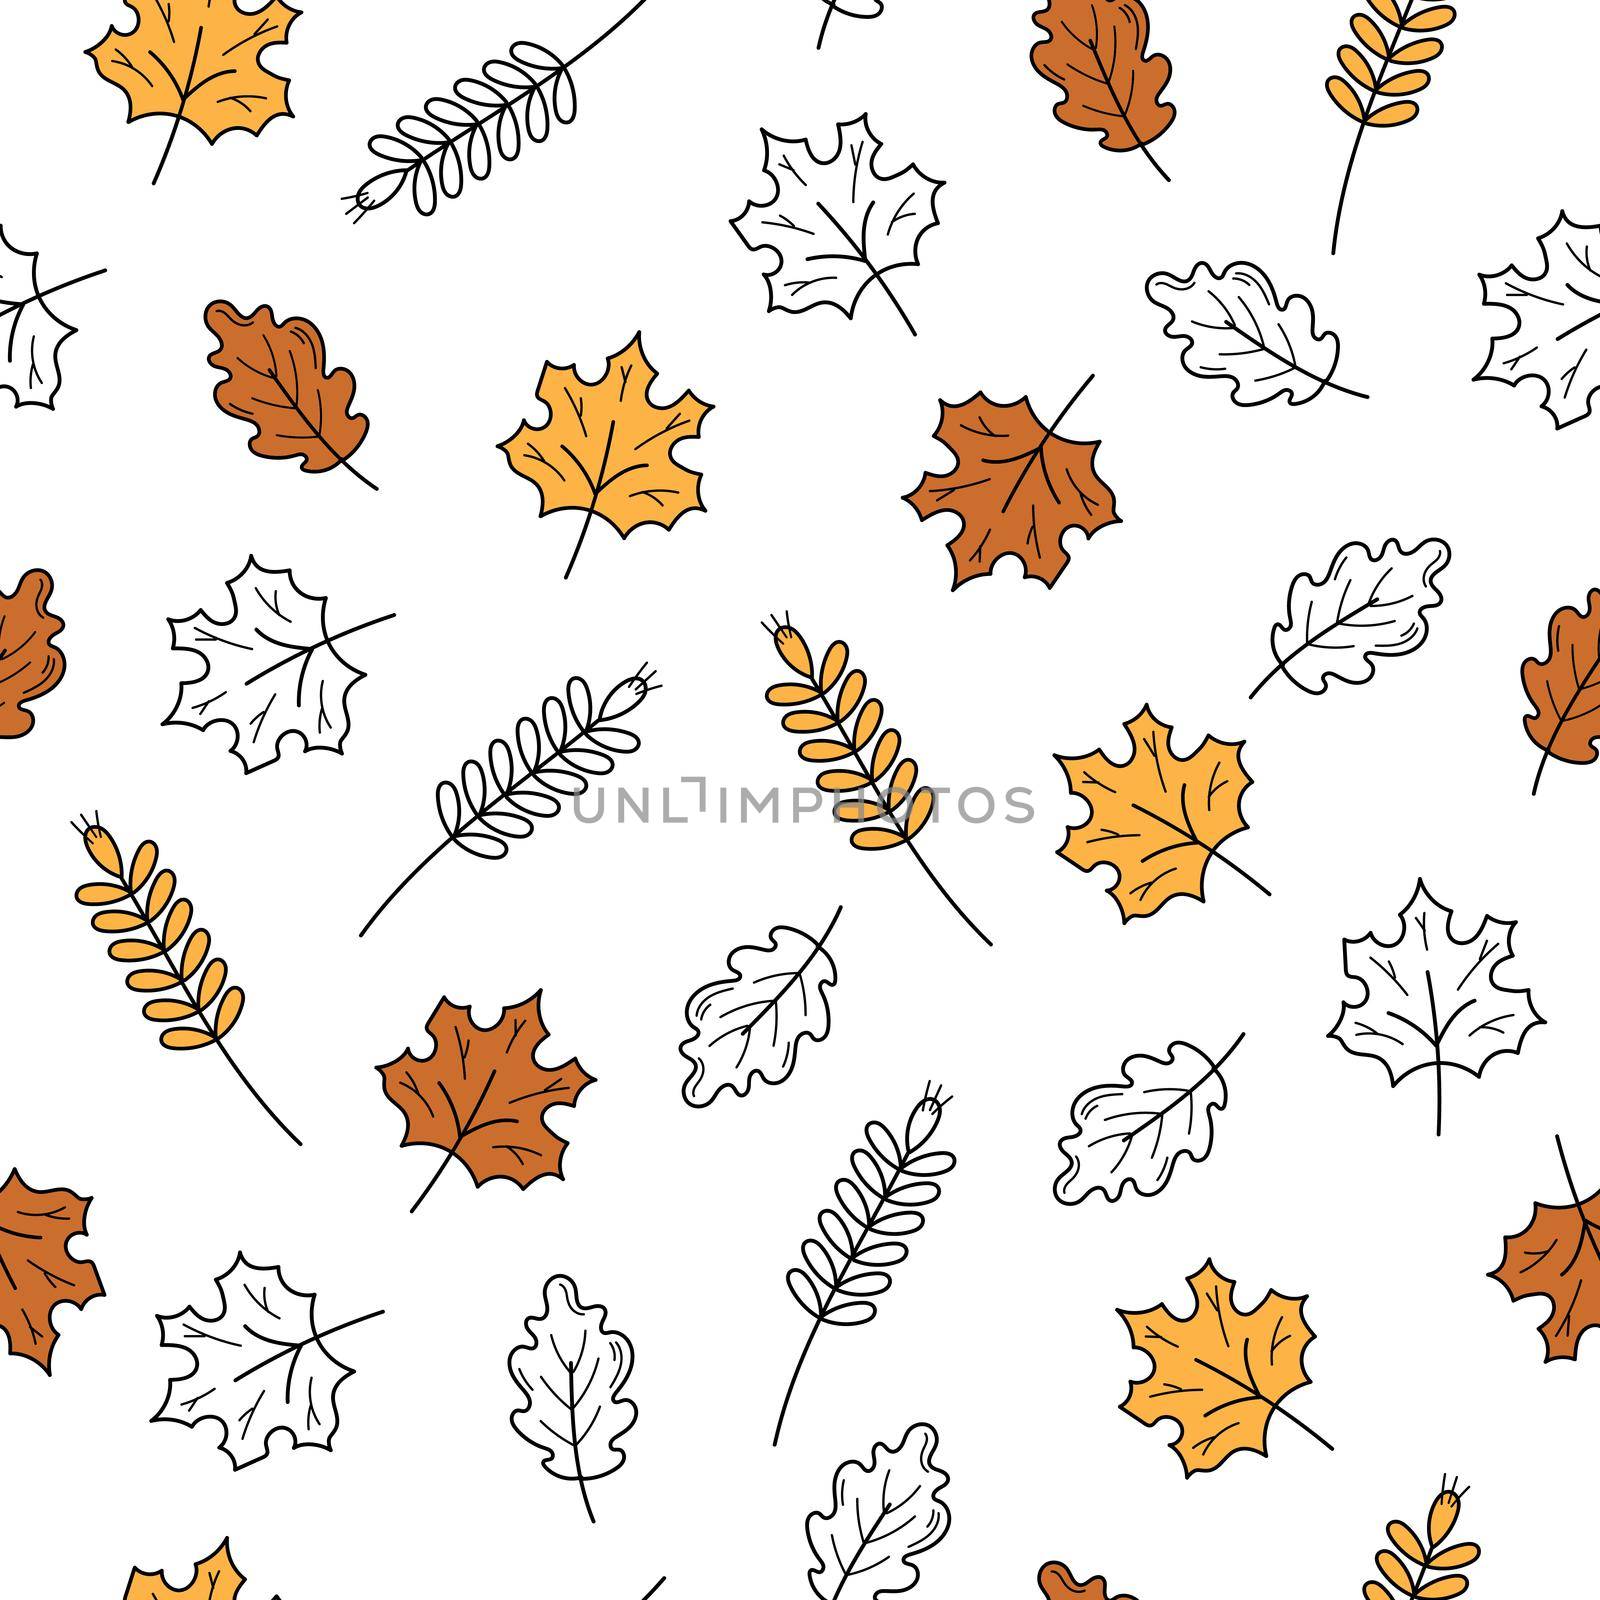 Colored and black and white icons of leaves hand drawn. Minimalistic endless pattern on a white background. Autumn seamless texture